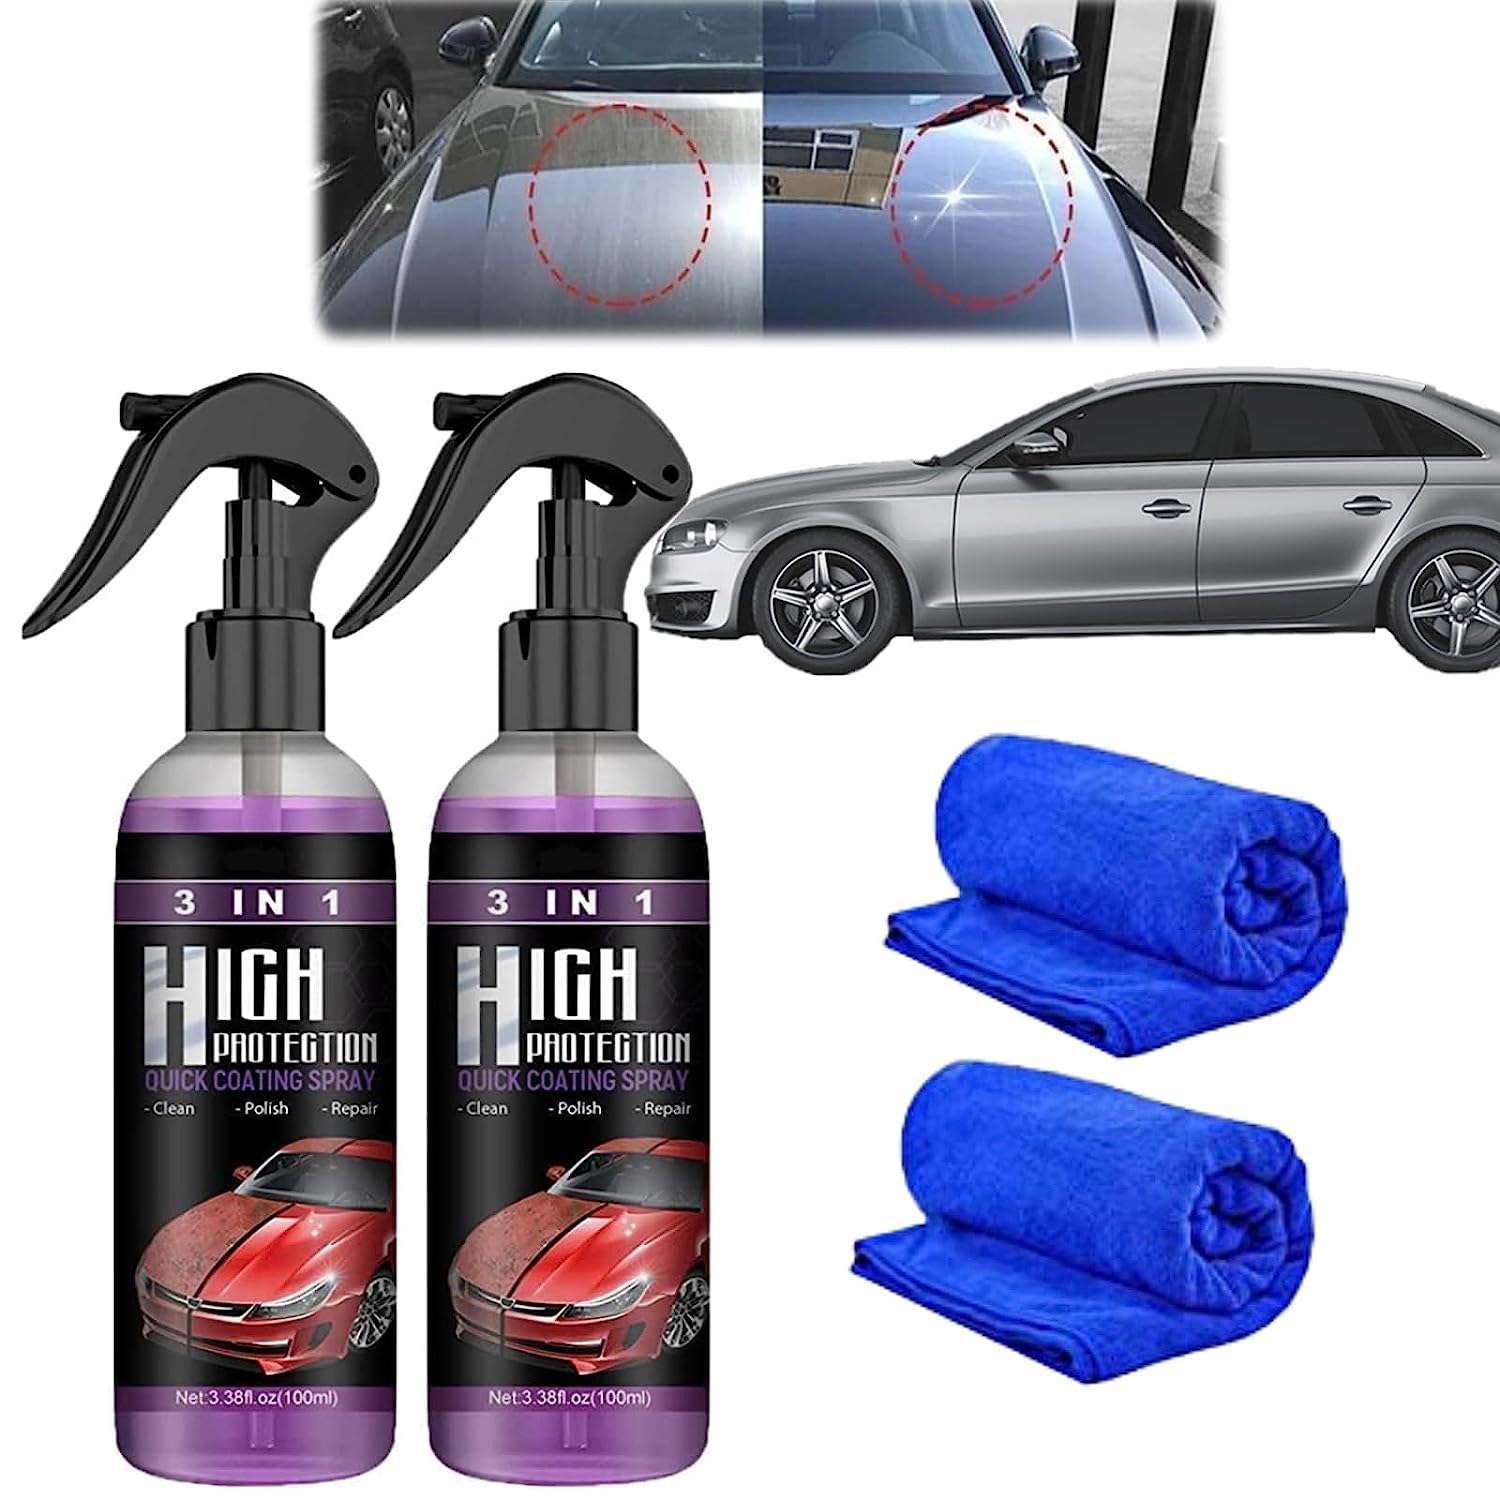 3 in 1 high Protection Fast car Ceramic Coating Spray, [...]